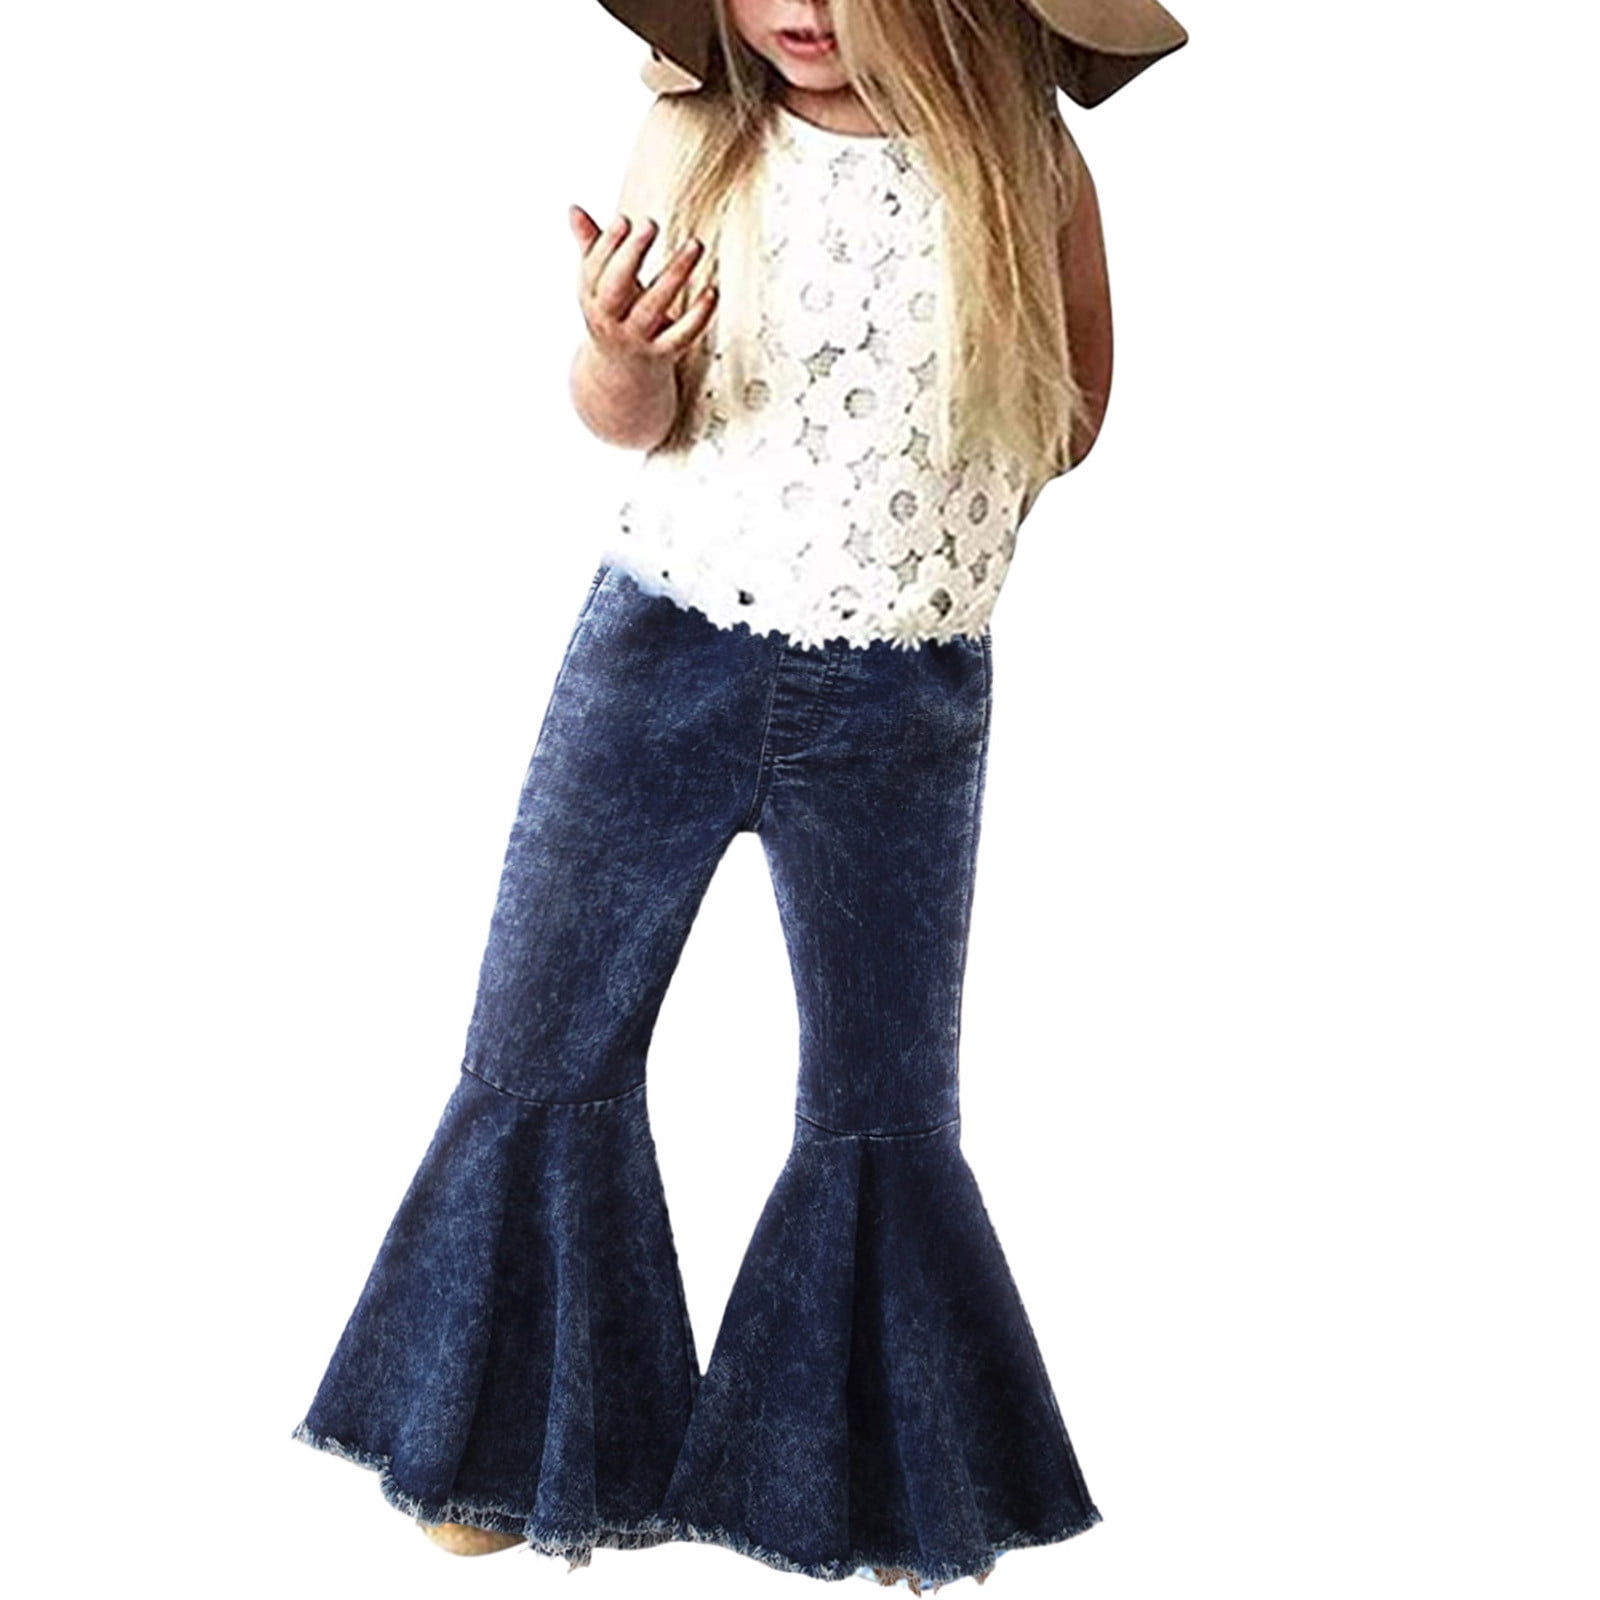 Wrrkayly Kids Toddler Little Baby Girl Bell Bottom Jeans Ruffle Ripped Flare Pants Leggings Denim Trousers Clothes 0-7T 